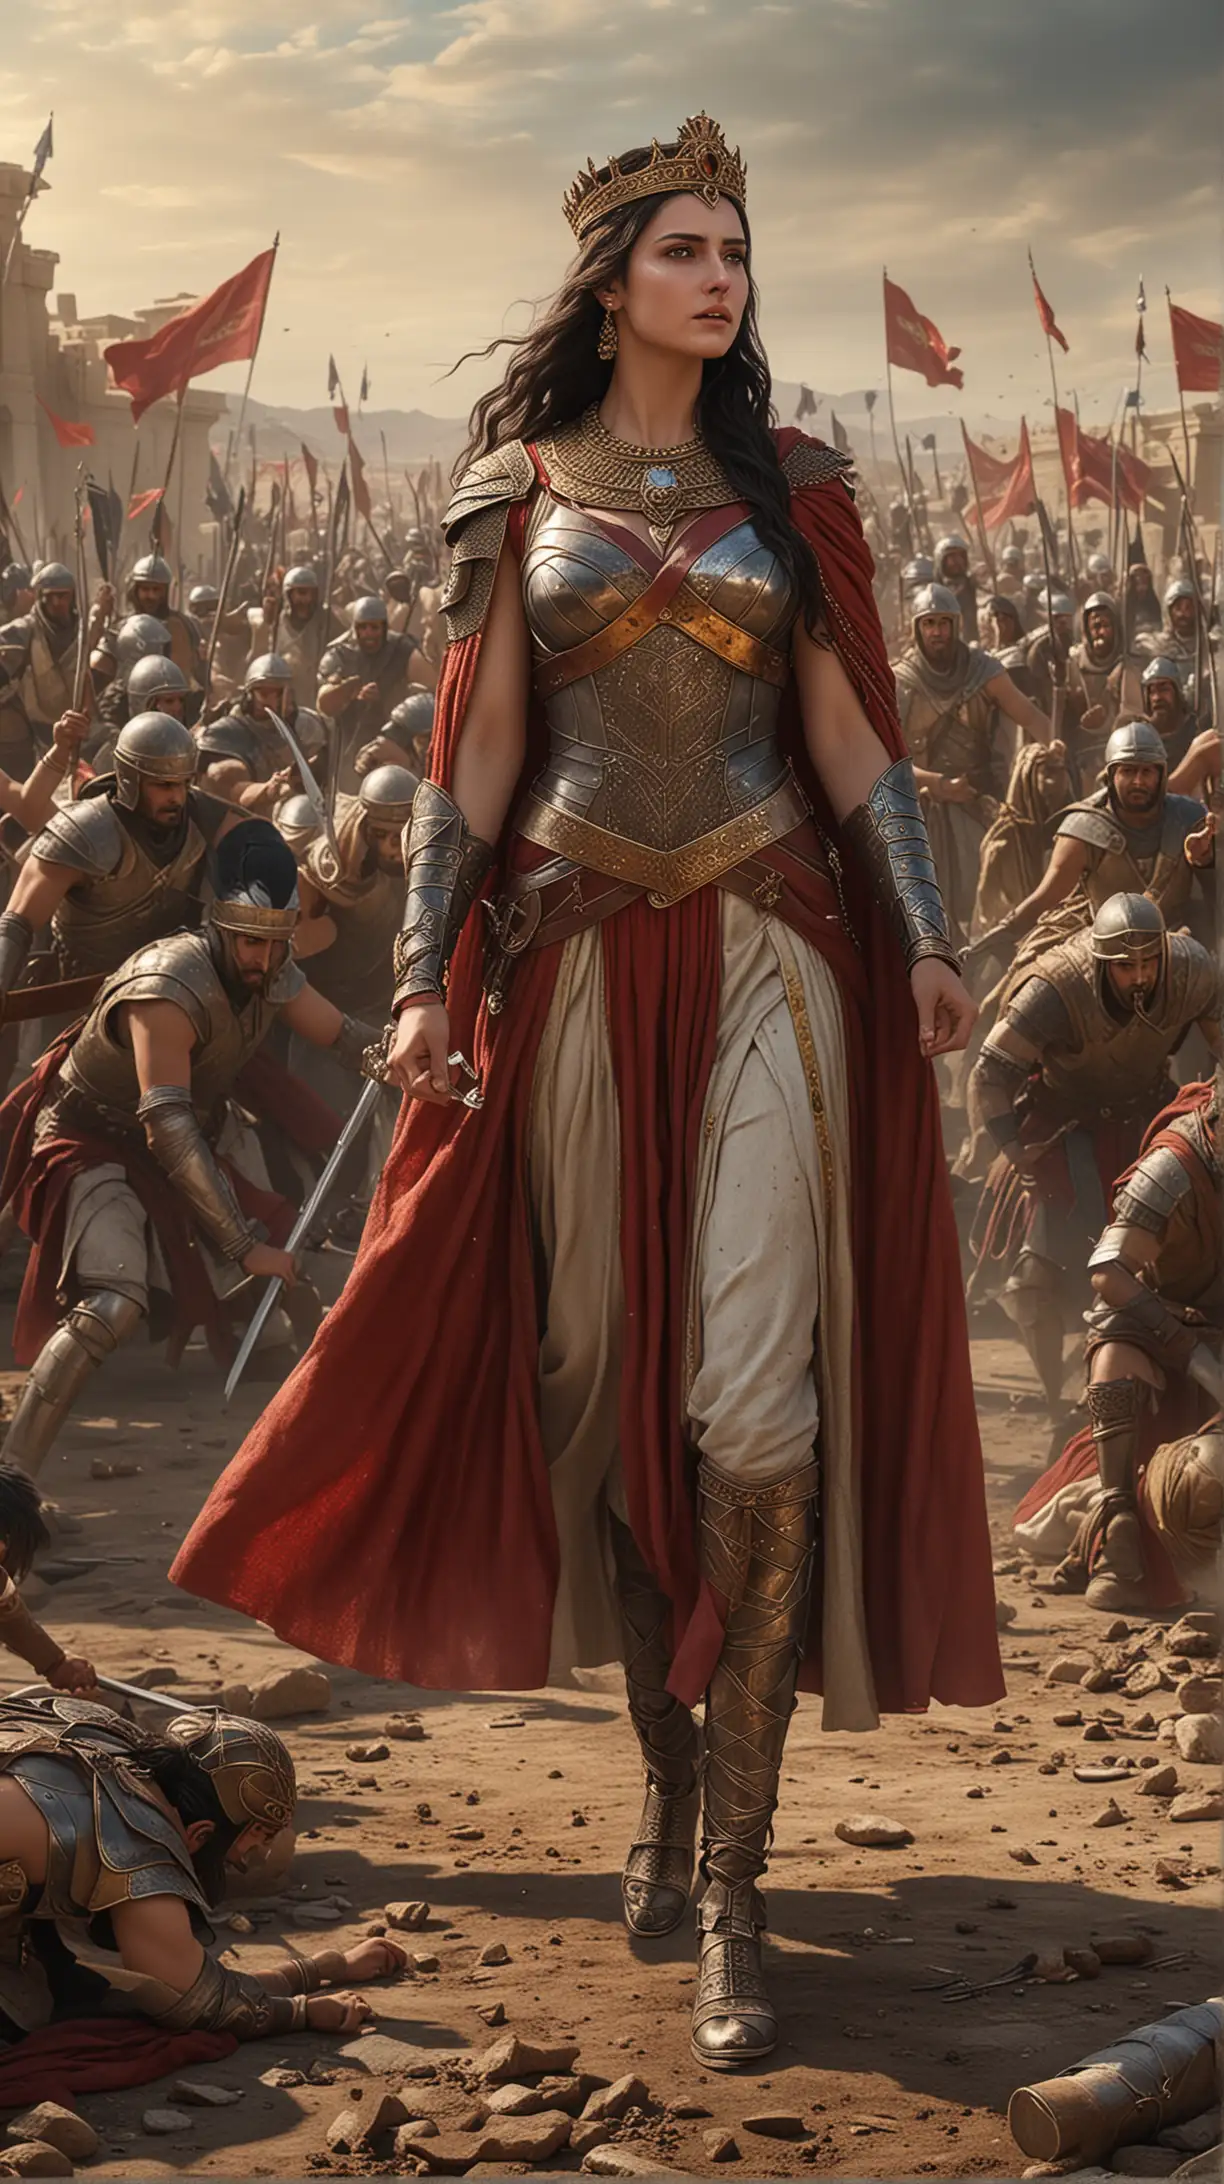 Triumph and Victory
Capture the moment of triumph as Queen Tomyris and her army emerge victorious over the Persians. They stand tall amidst the aftermath of battle, their faces filled with pride and determination. hyper realistic